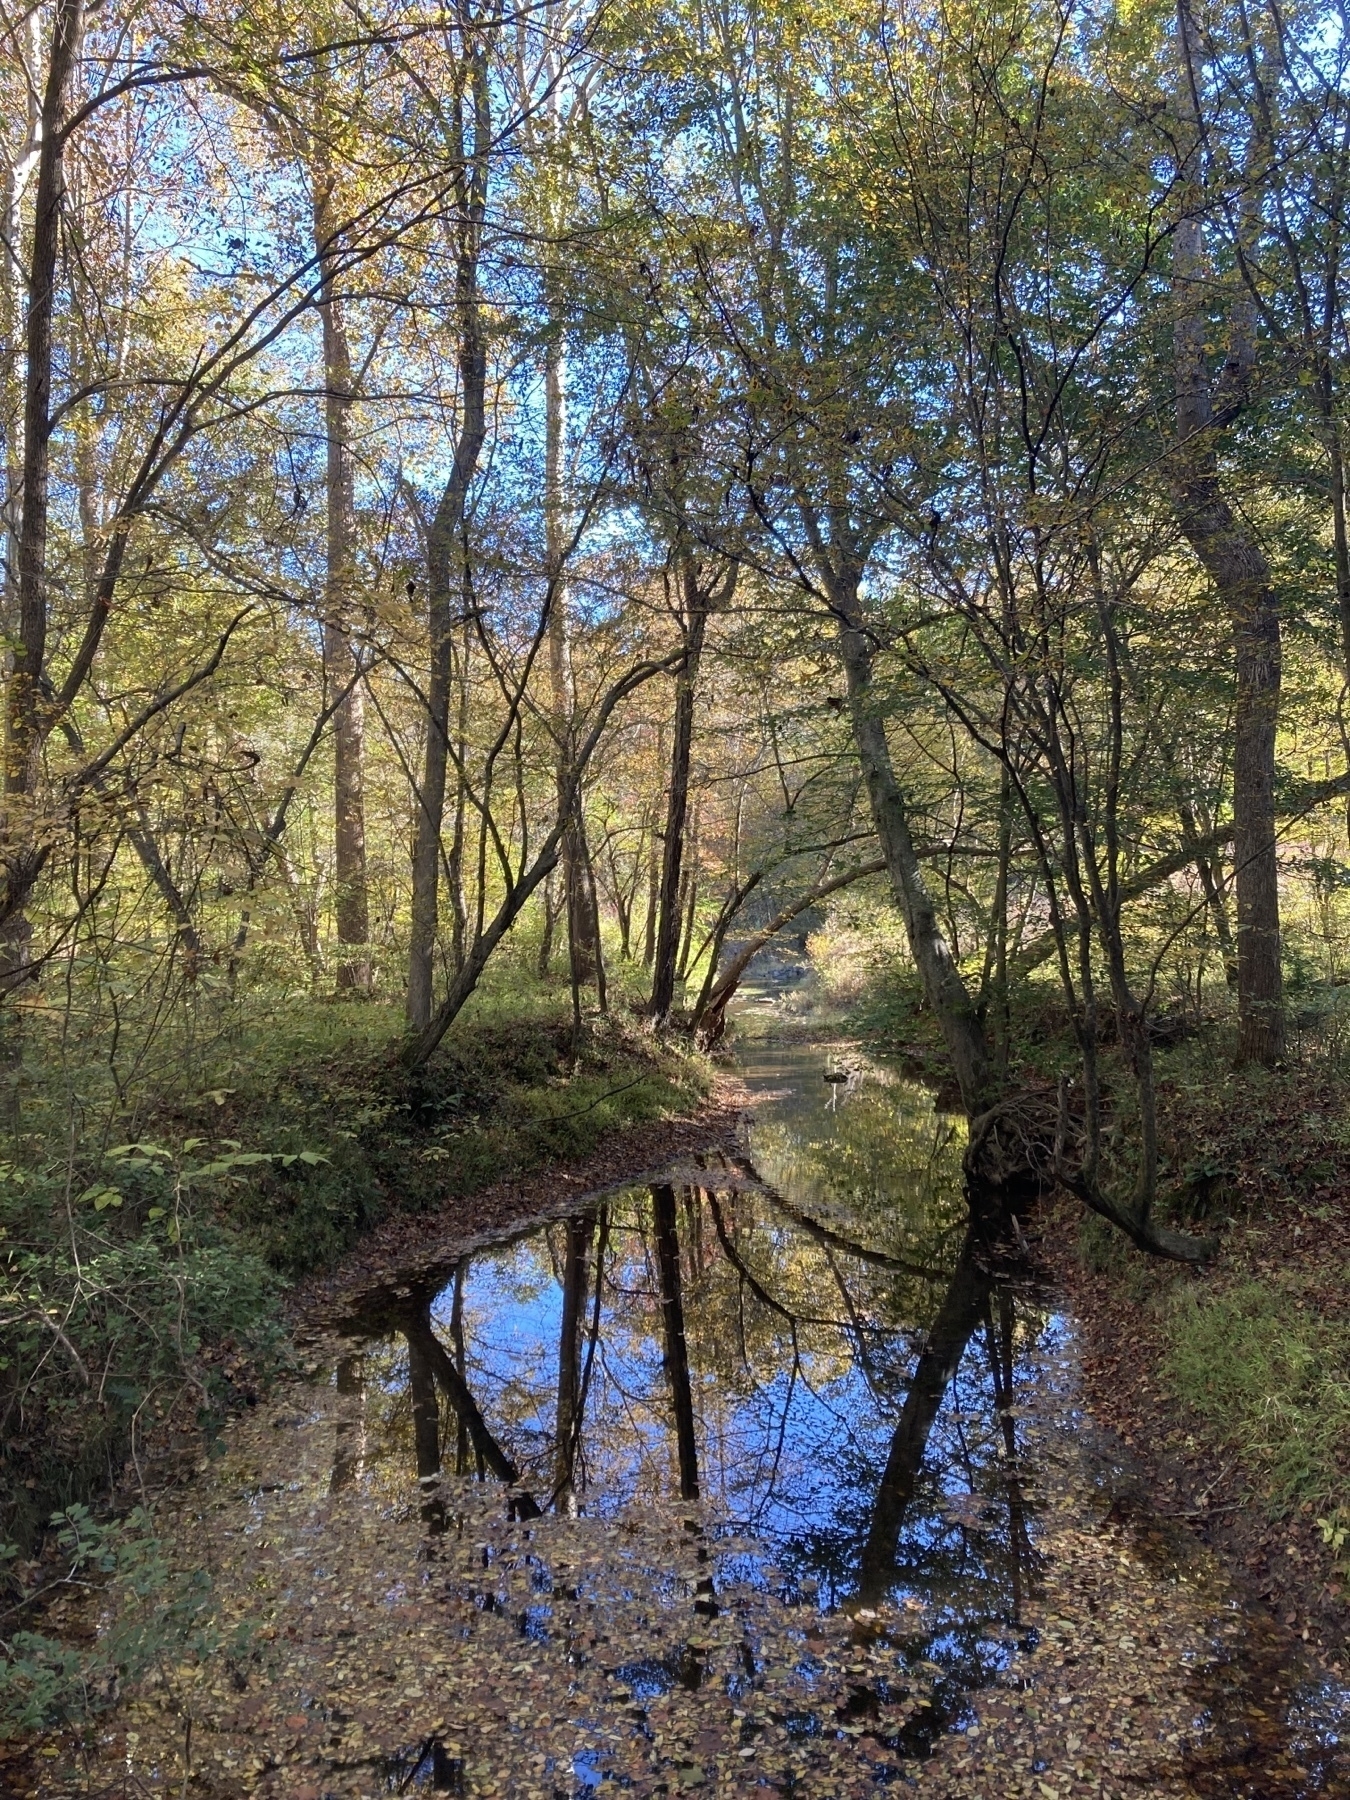 creek theough the woods with reflection of trees and sky